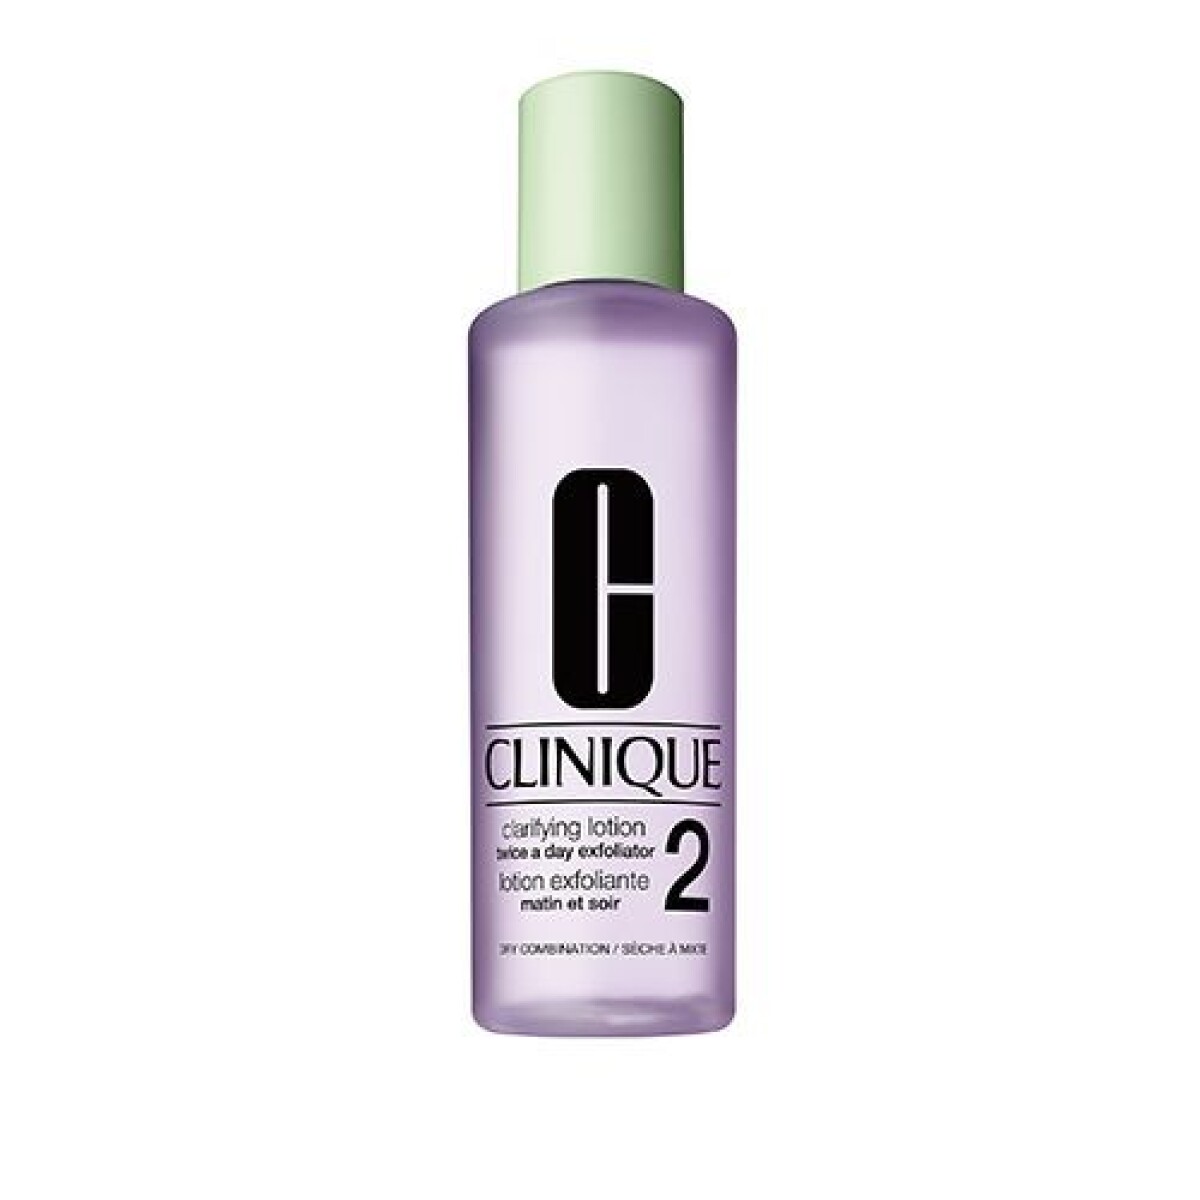 Clinique Clarifying Lotion 2 400 ml 